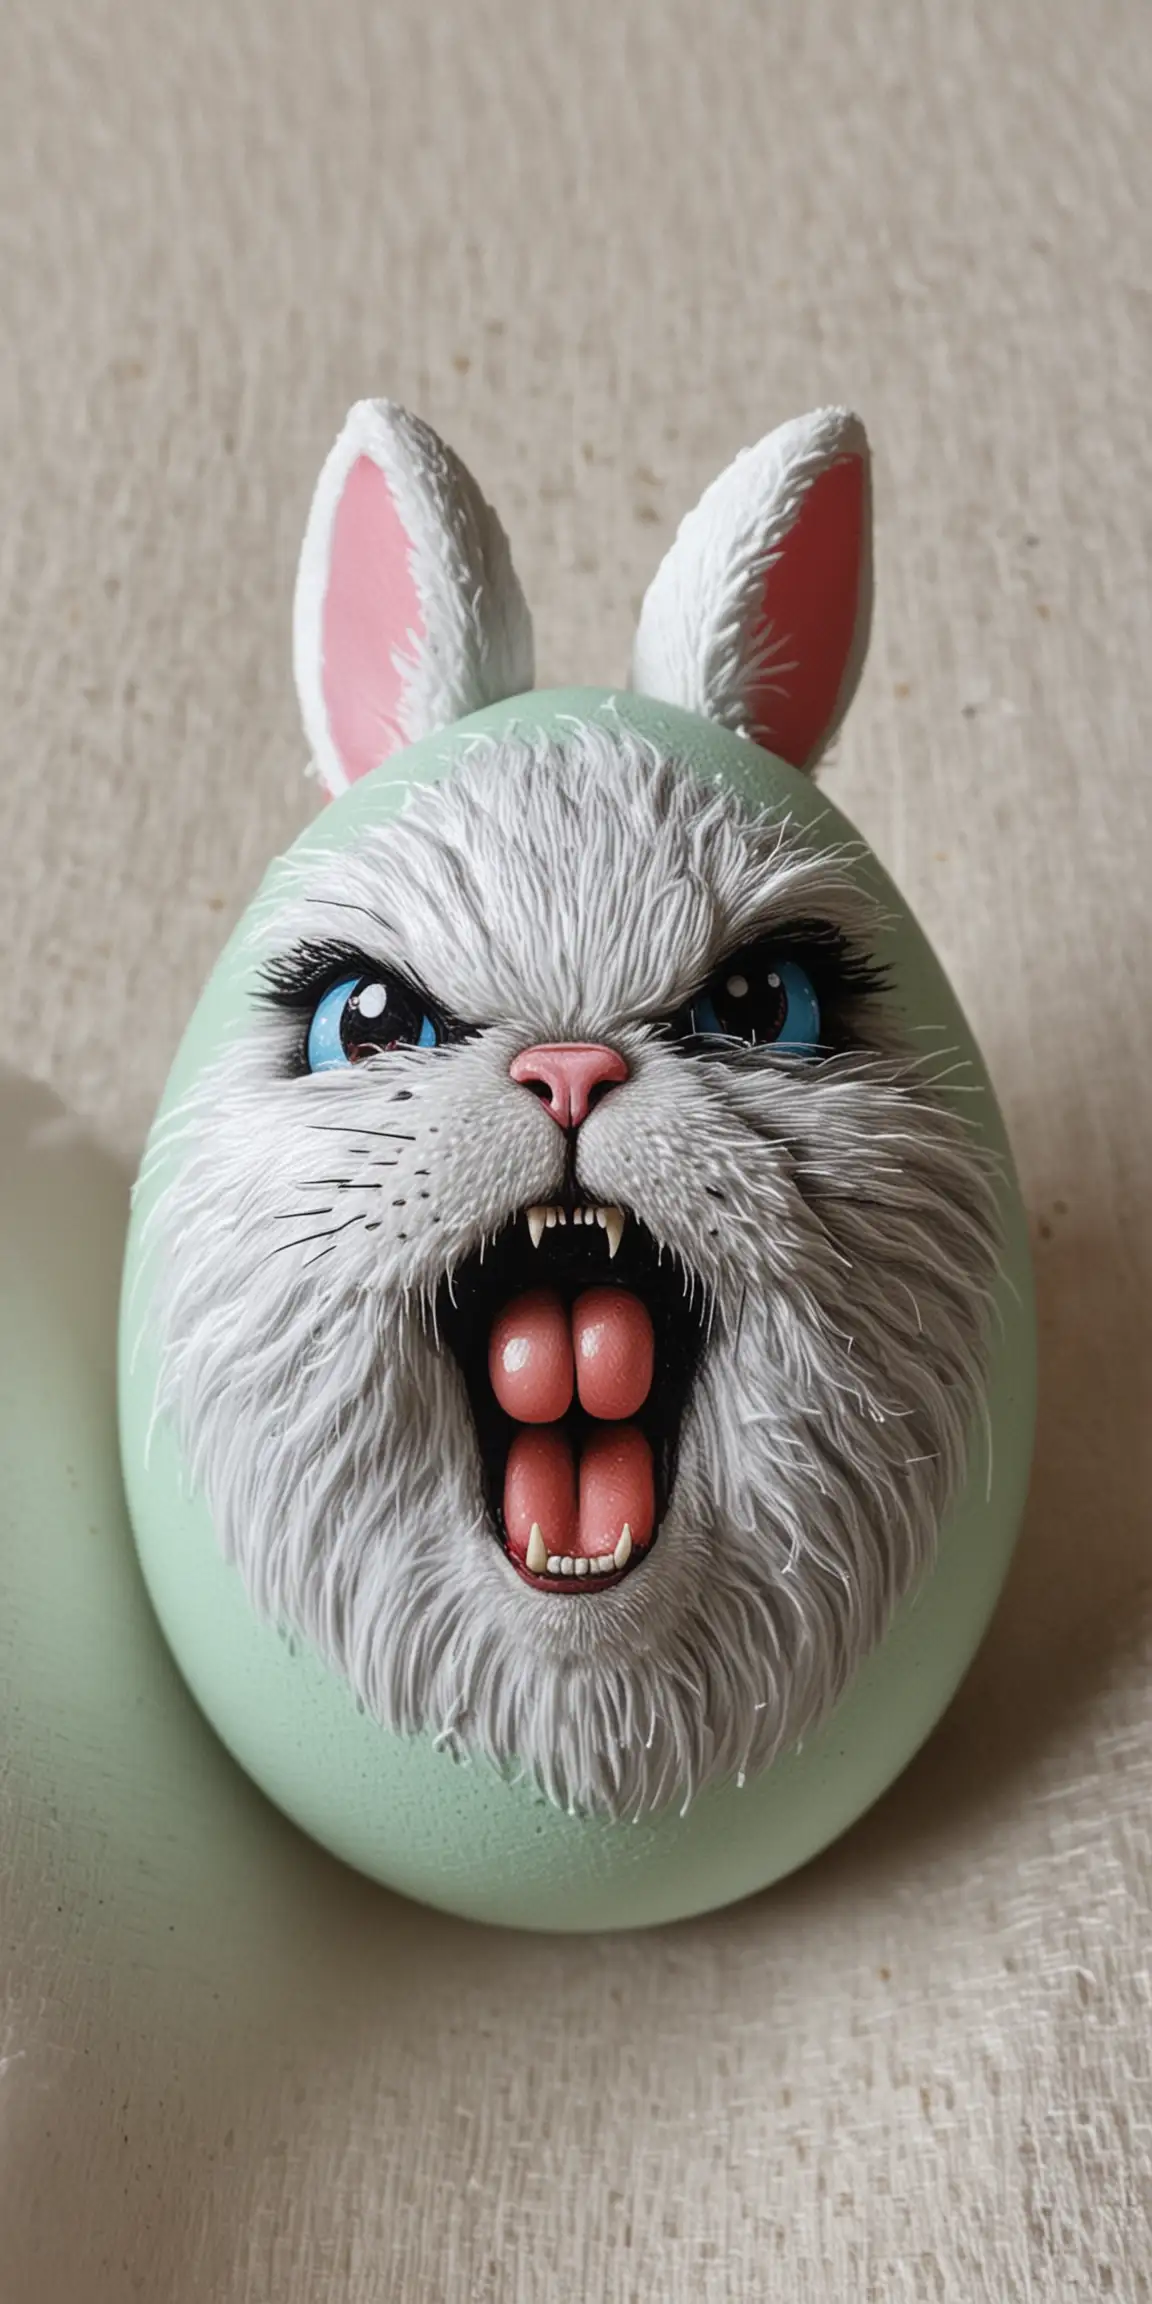 Angry bunny painted on an Easter egg